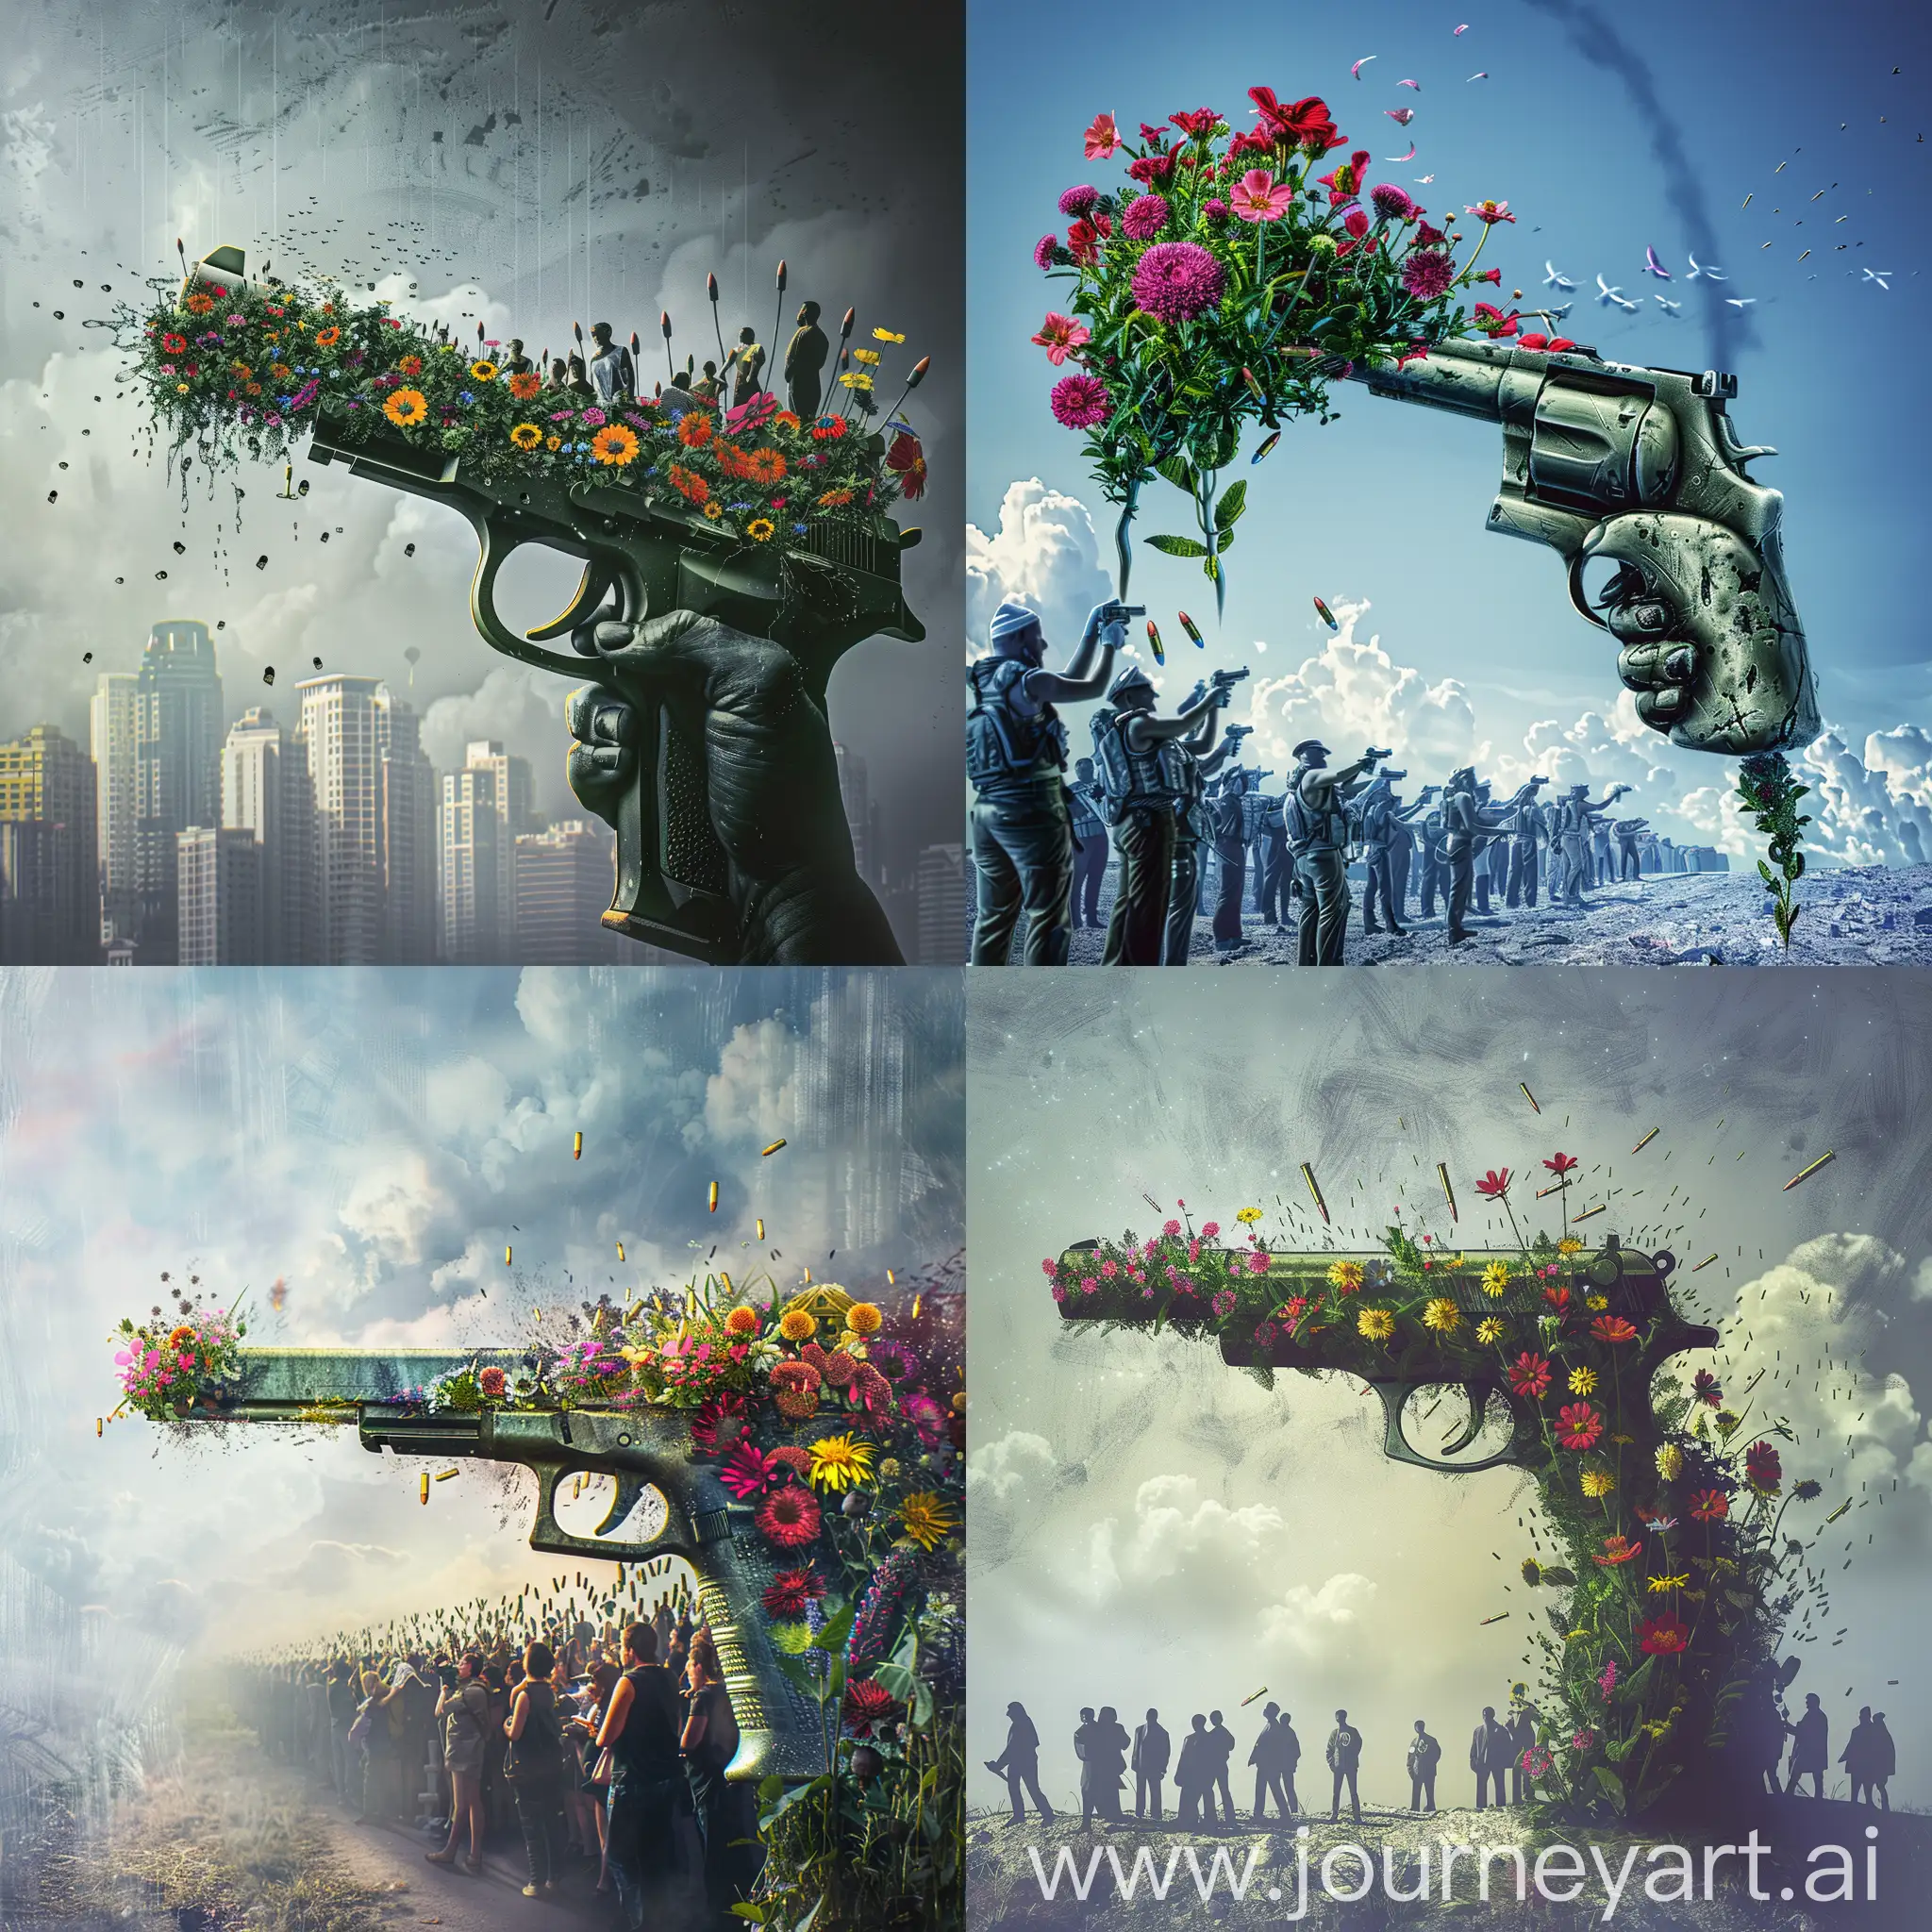 Symbolic-Peace-Gun-Transformed-into-Blooming-Flowers